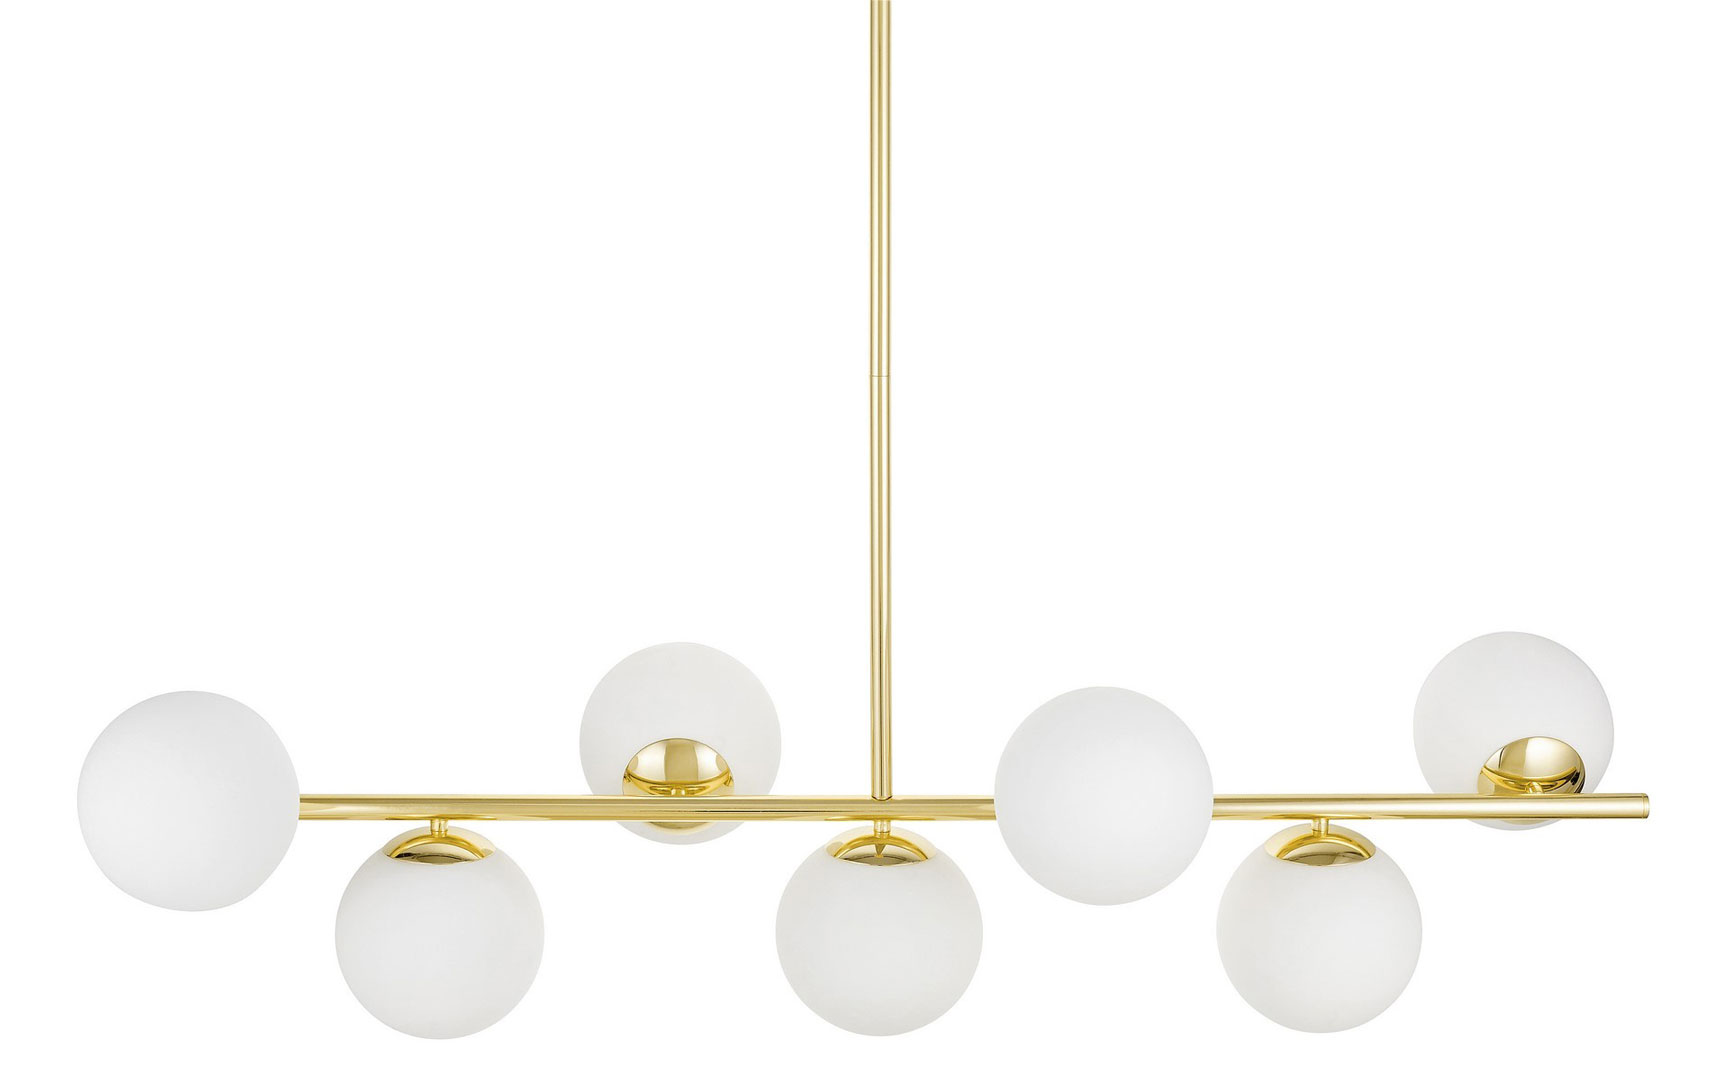 Gold chandelier, glass white balls, pendant lamp with shades on a horizontal bar, classic gold - FREDICA W7 - Lumina Deco image 2